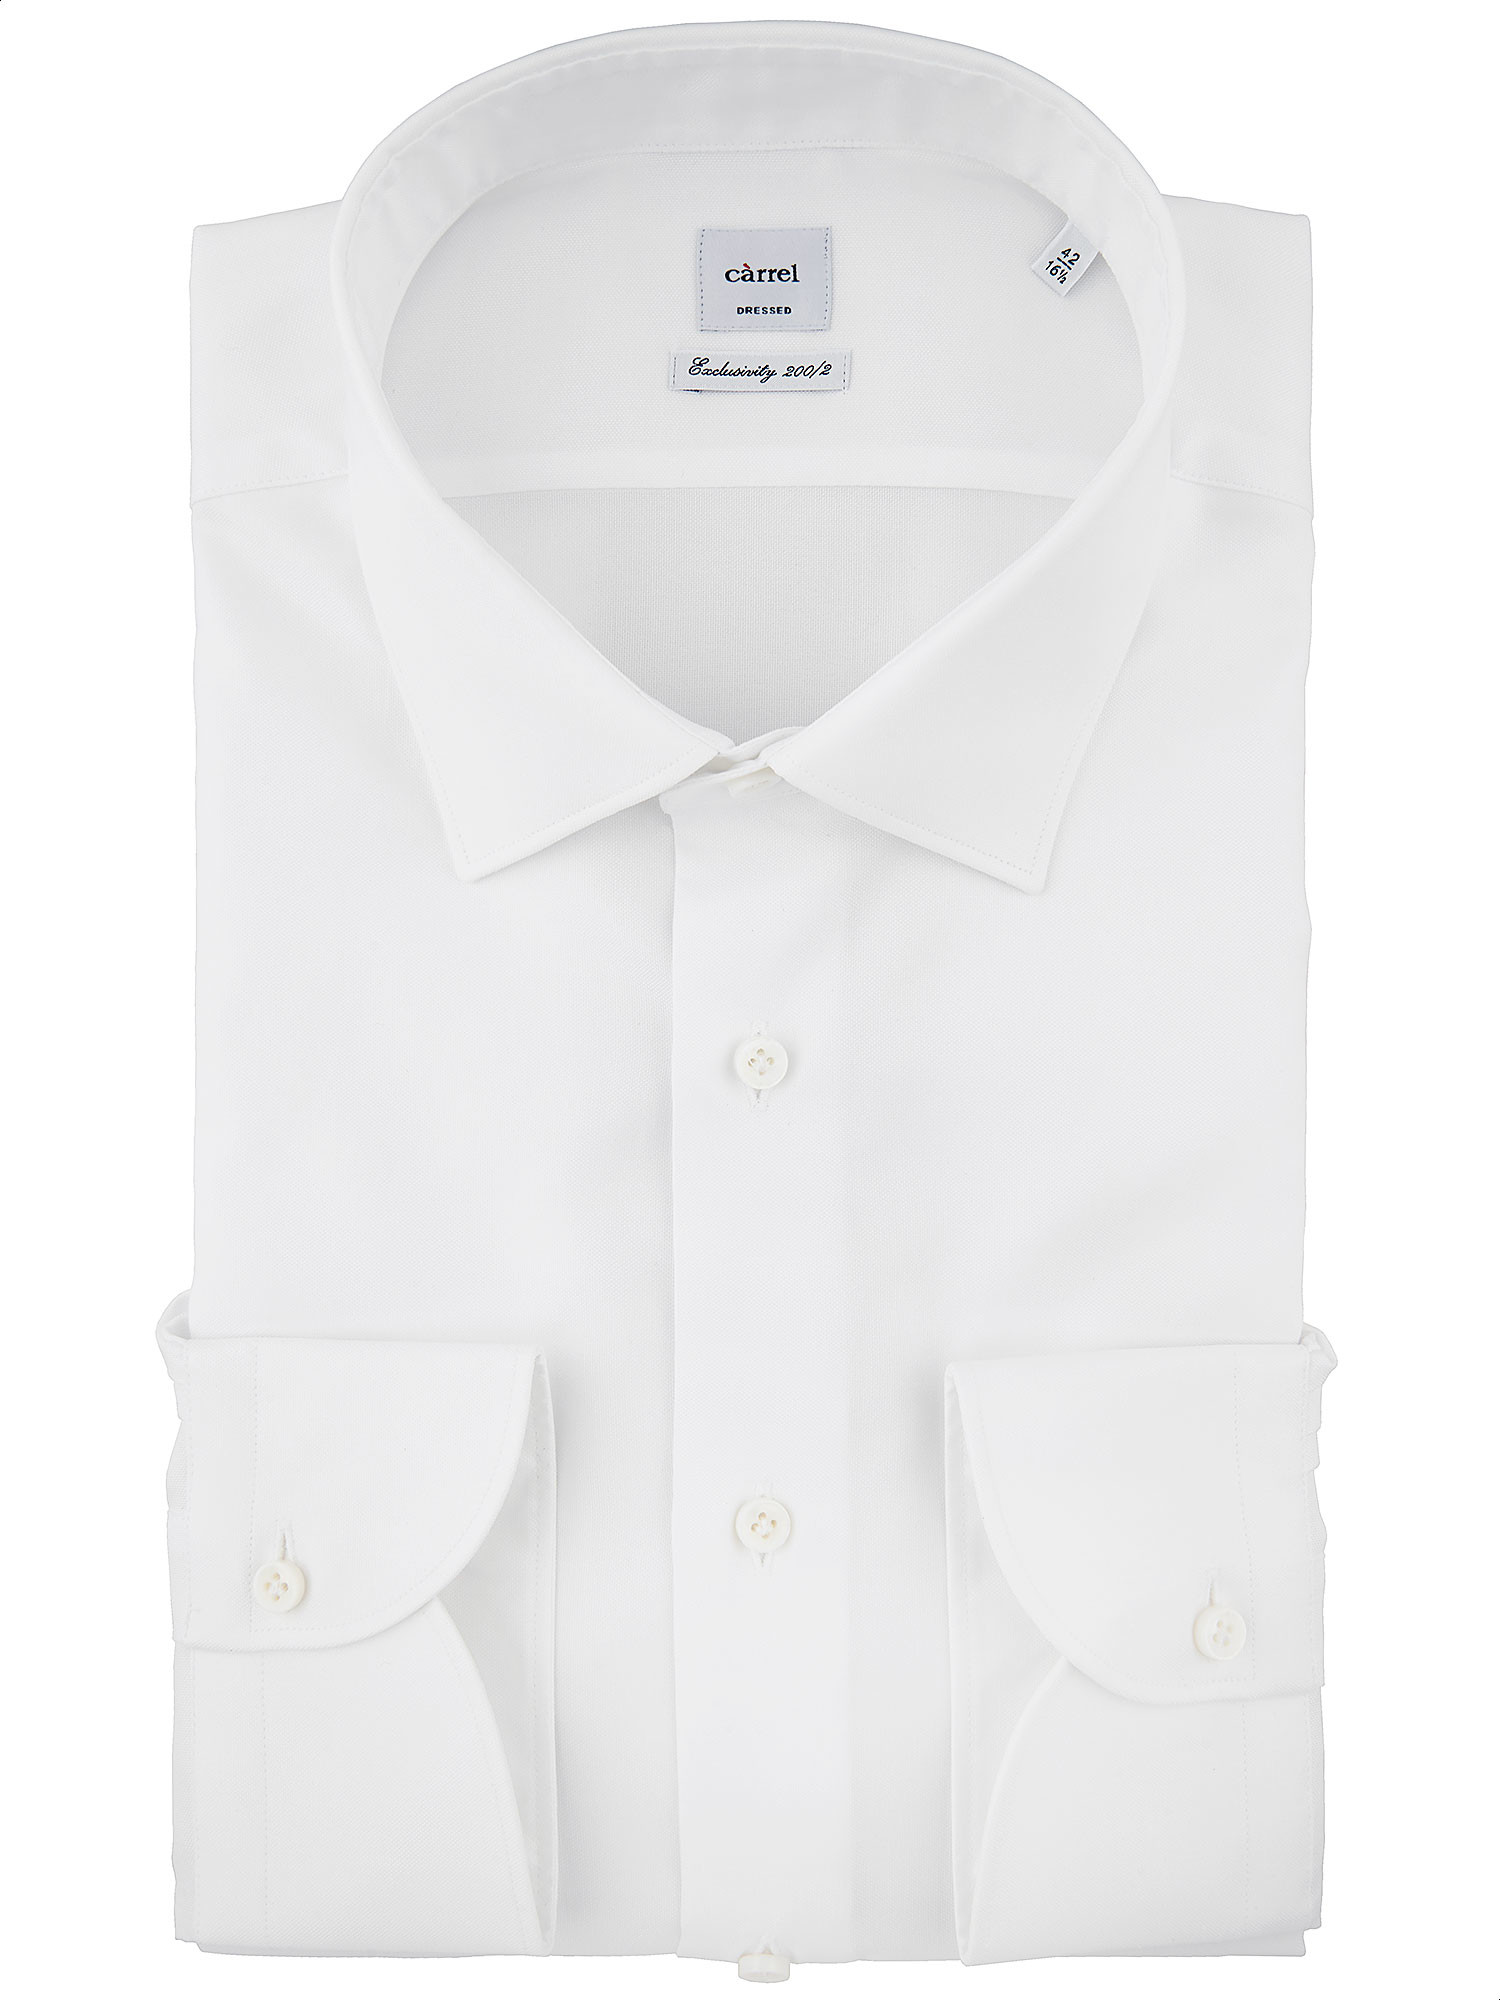 Càrrel - White high quality shirt double twisted fabric